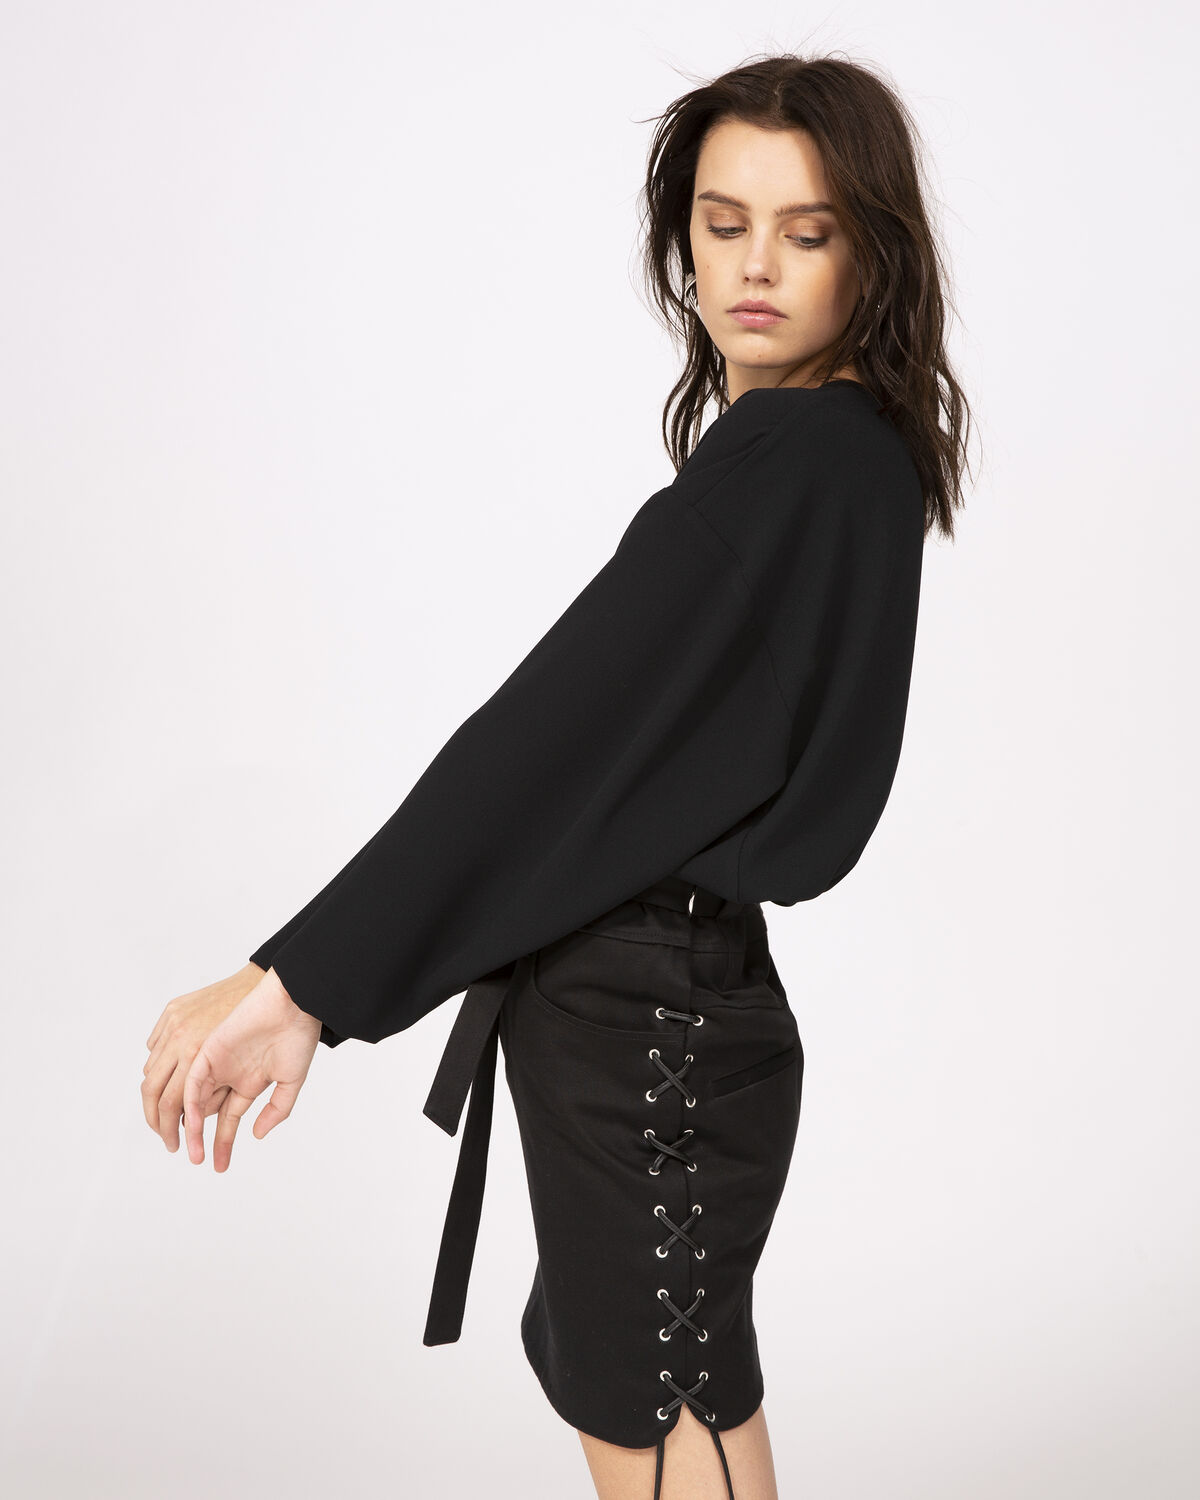 Photo of IRO Paris Lithe Top Black - This Long-sleeve Top Is A Must This Season. Combine It With A Skirt For A Glamorous Look, Or Leather Pants For A Resolutely Rock Look. Shirts-Tops